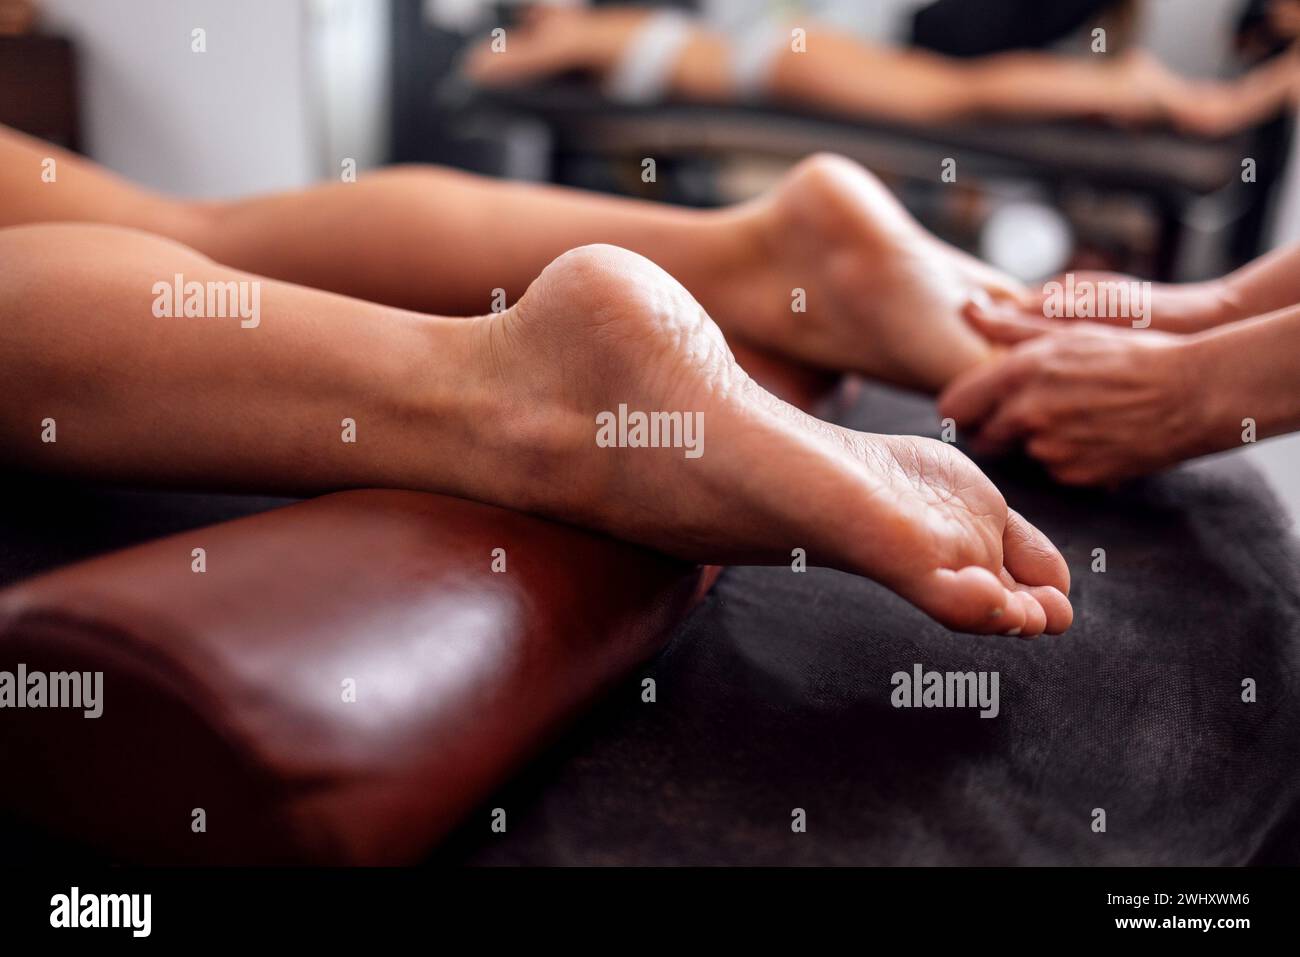 Close up of female foot getting gentle massage Stock Photo